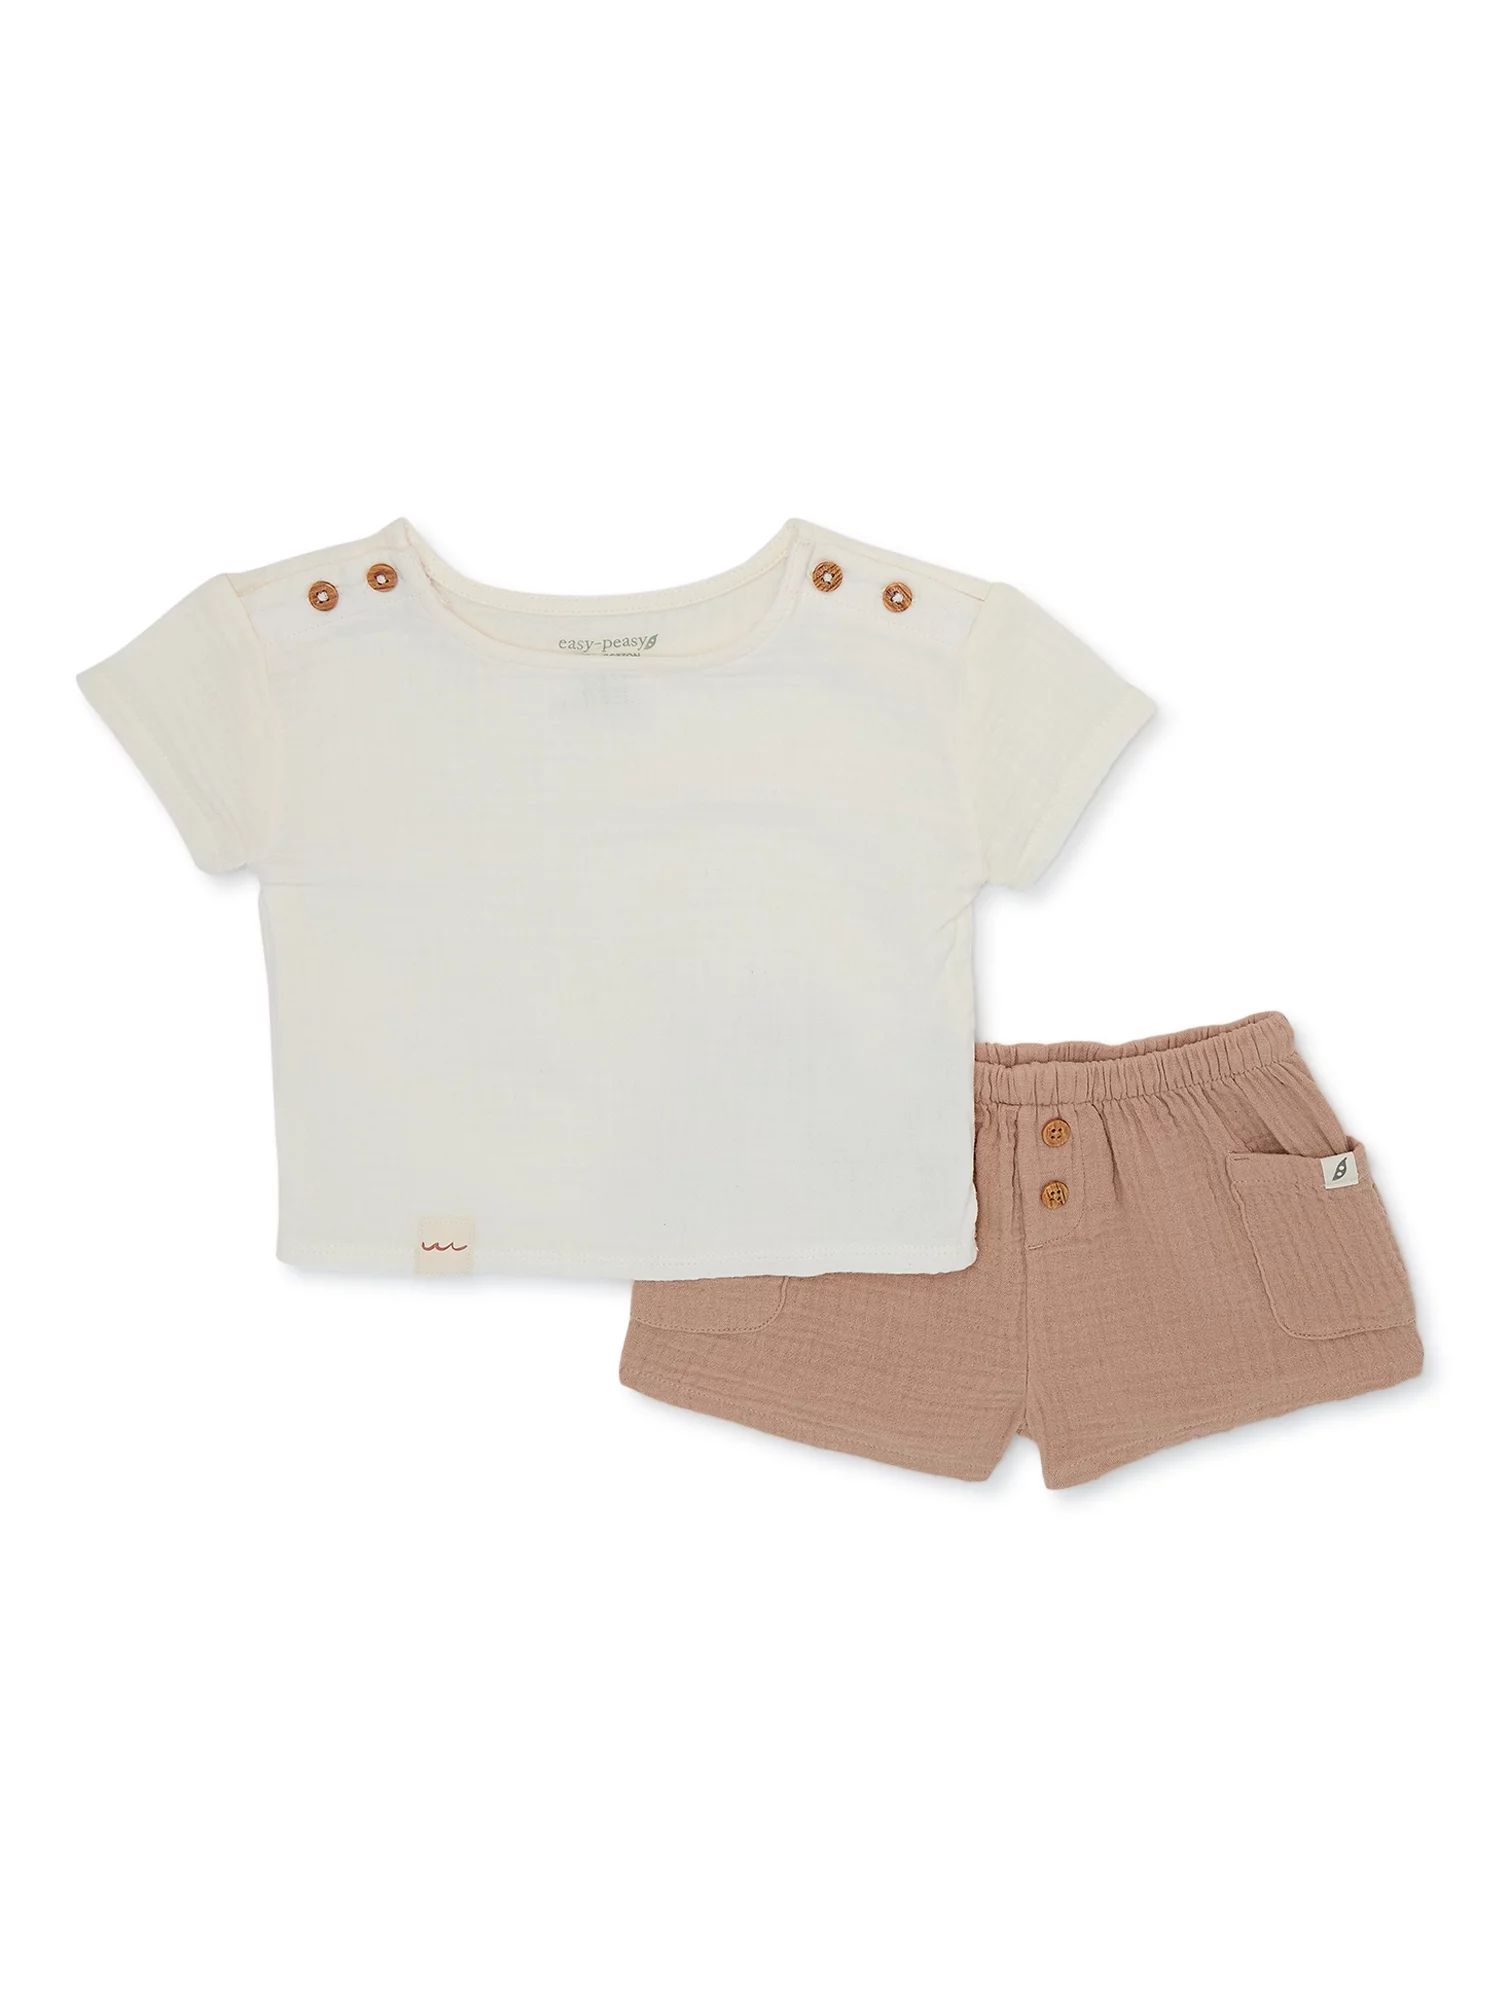 easy-peasyeasy-peasy Baby Short Sleeve Tee and Shorts Outfit Set, 2-Piece, Sizes 0M-24MUSD$16.00P... | Walmart (US)